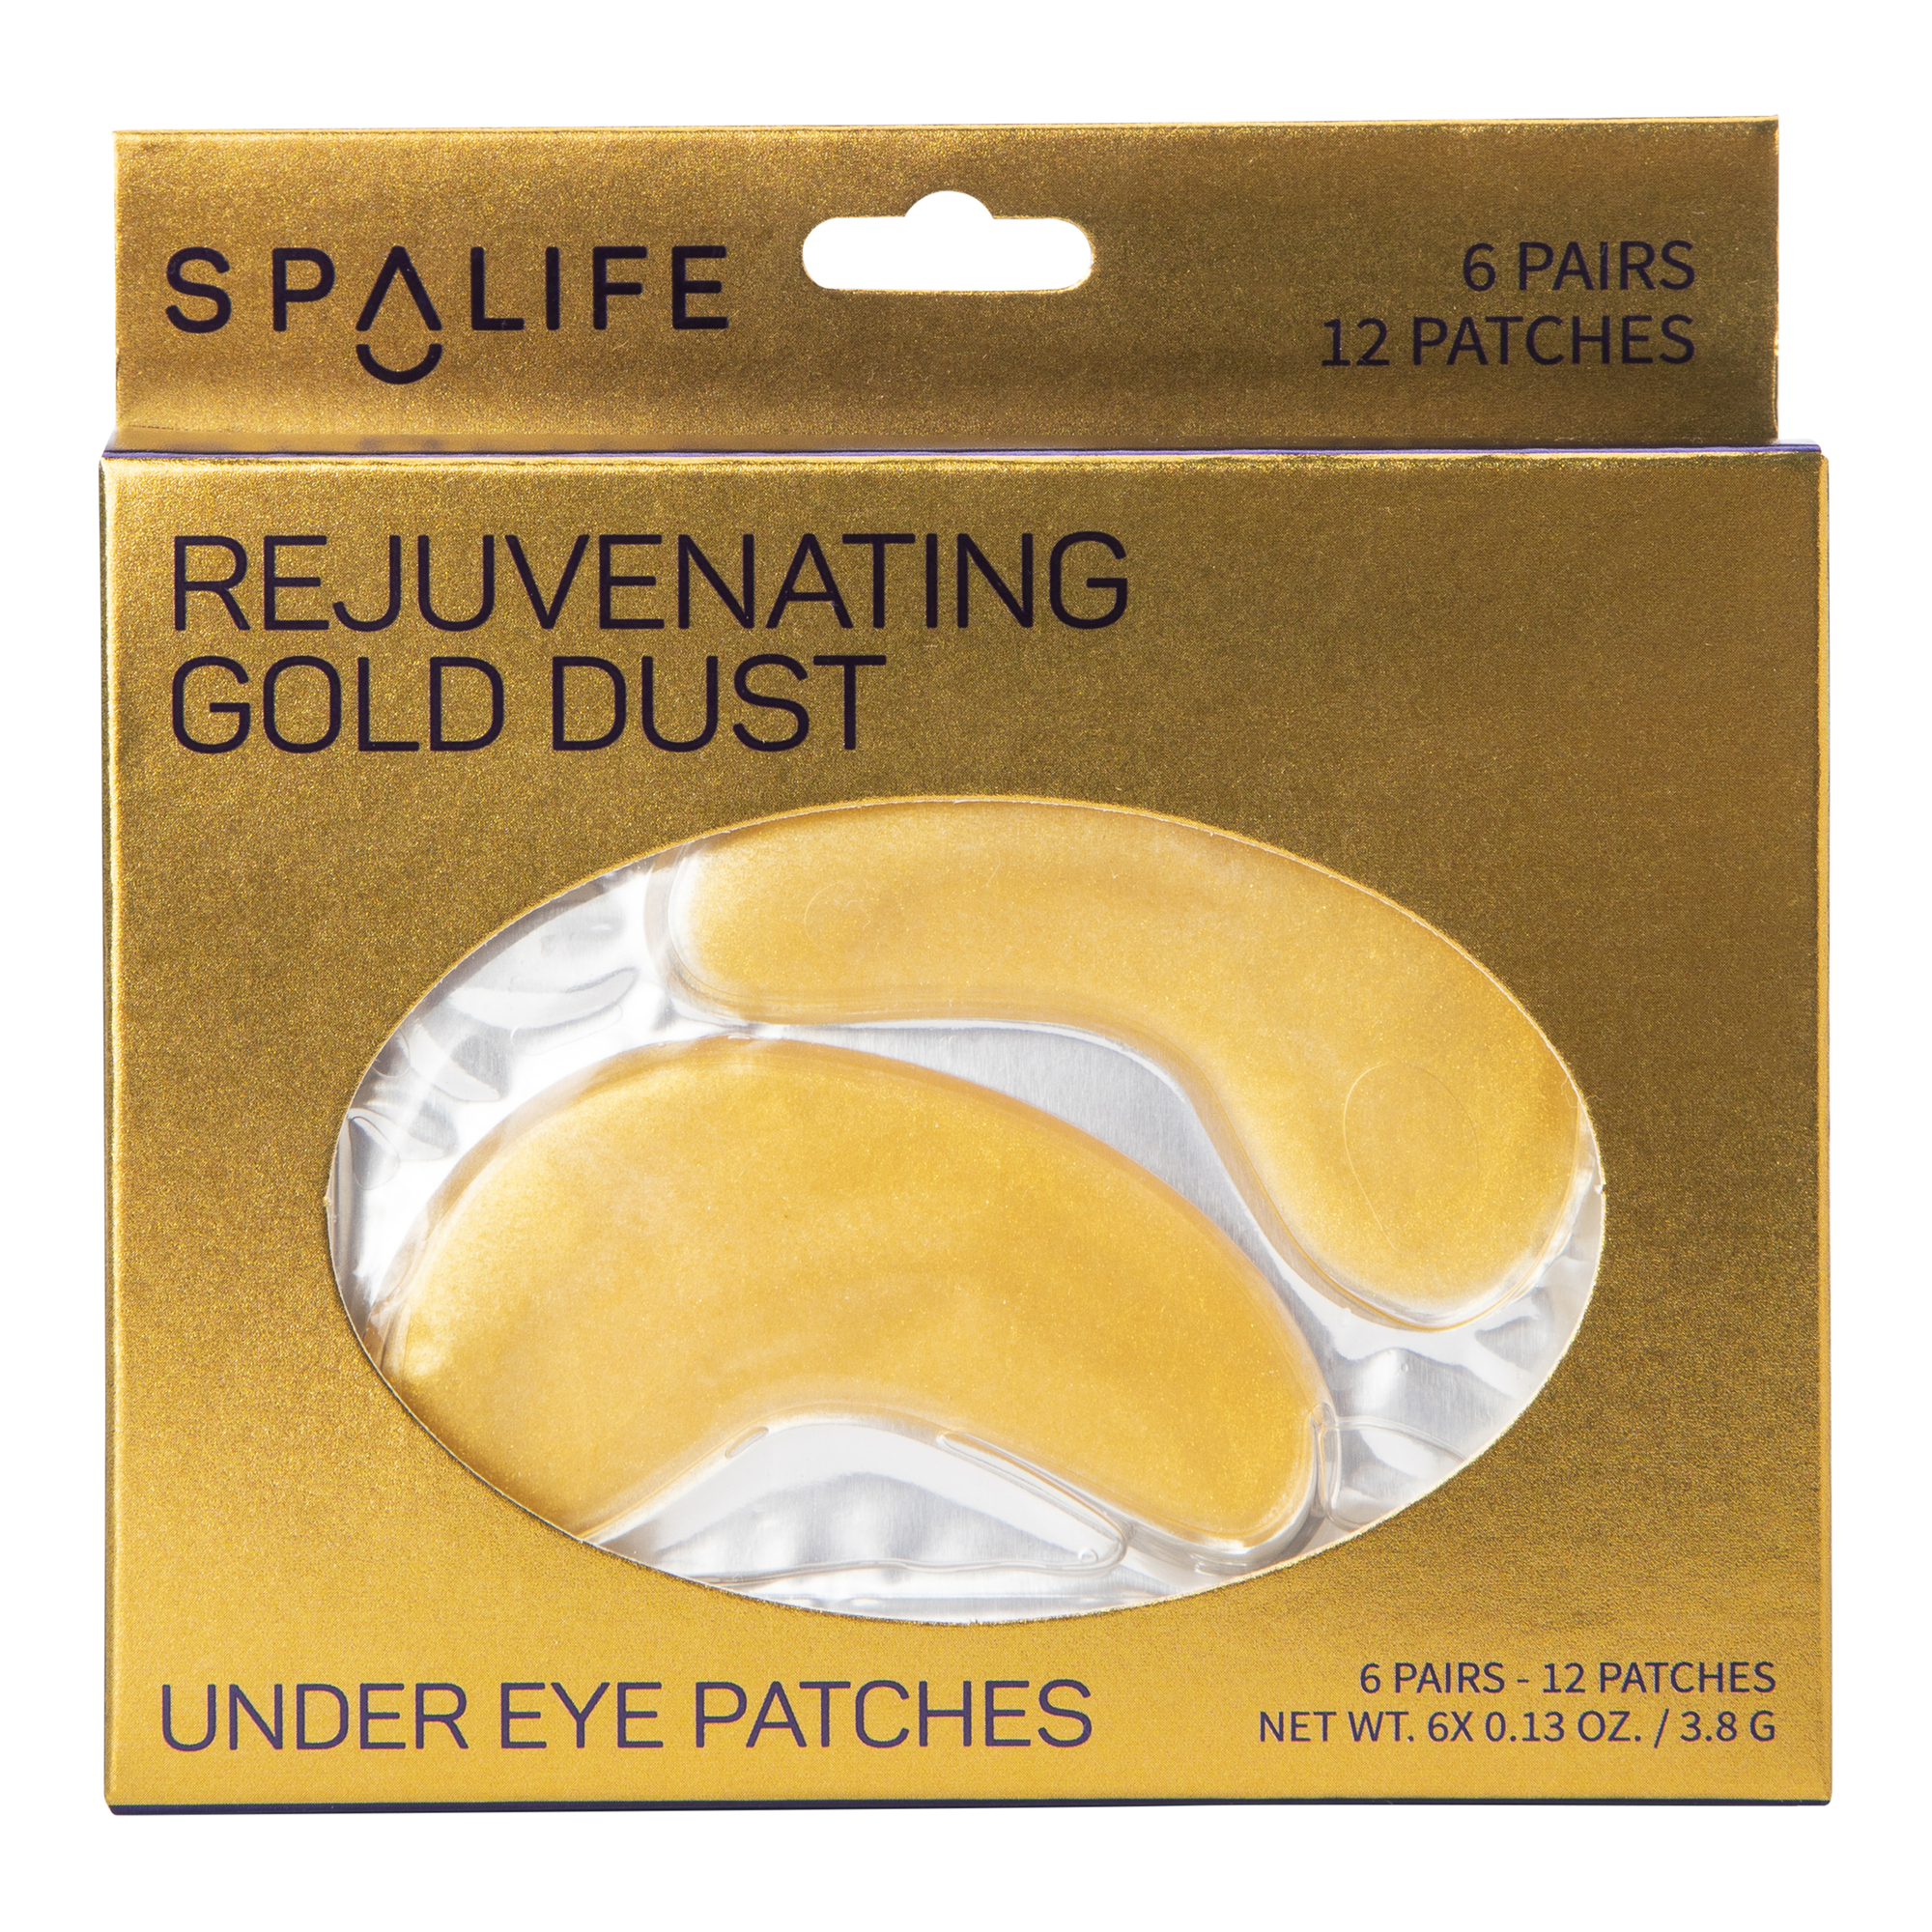 rejuvenating gold dust under-eye patches, 6 pairs